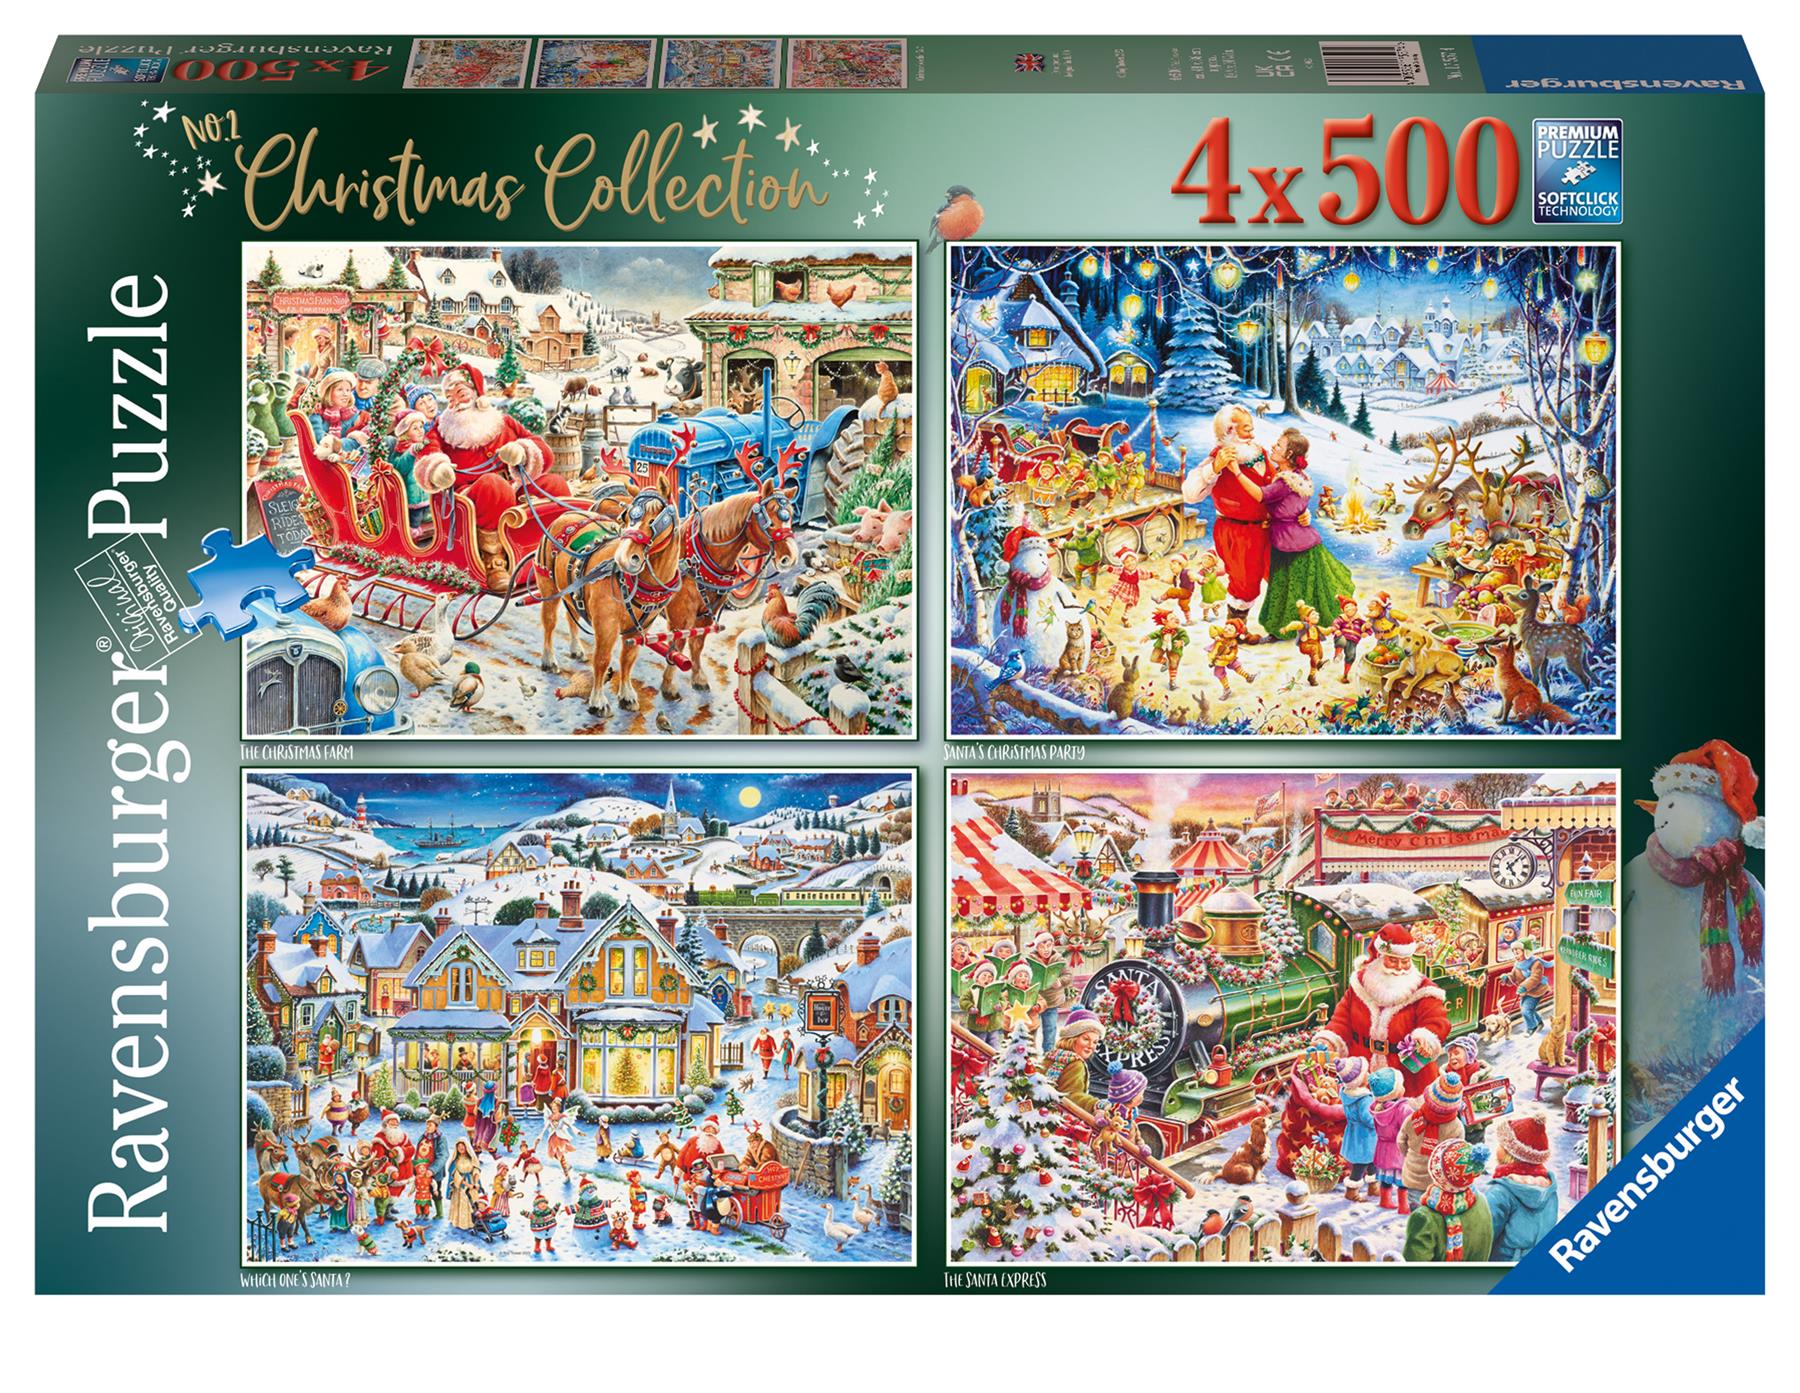 Christmas Collection 4 X 500 Piece Jigsaw Puzzle – All Jigsaw Puzzles